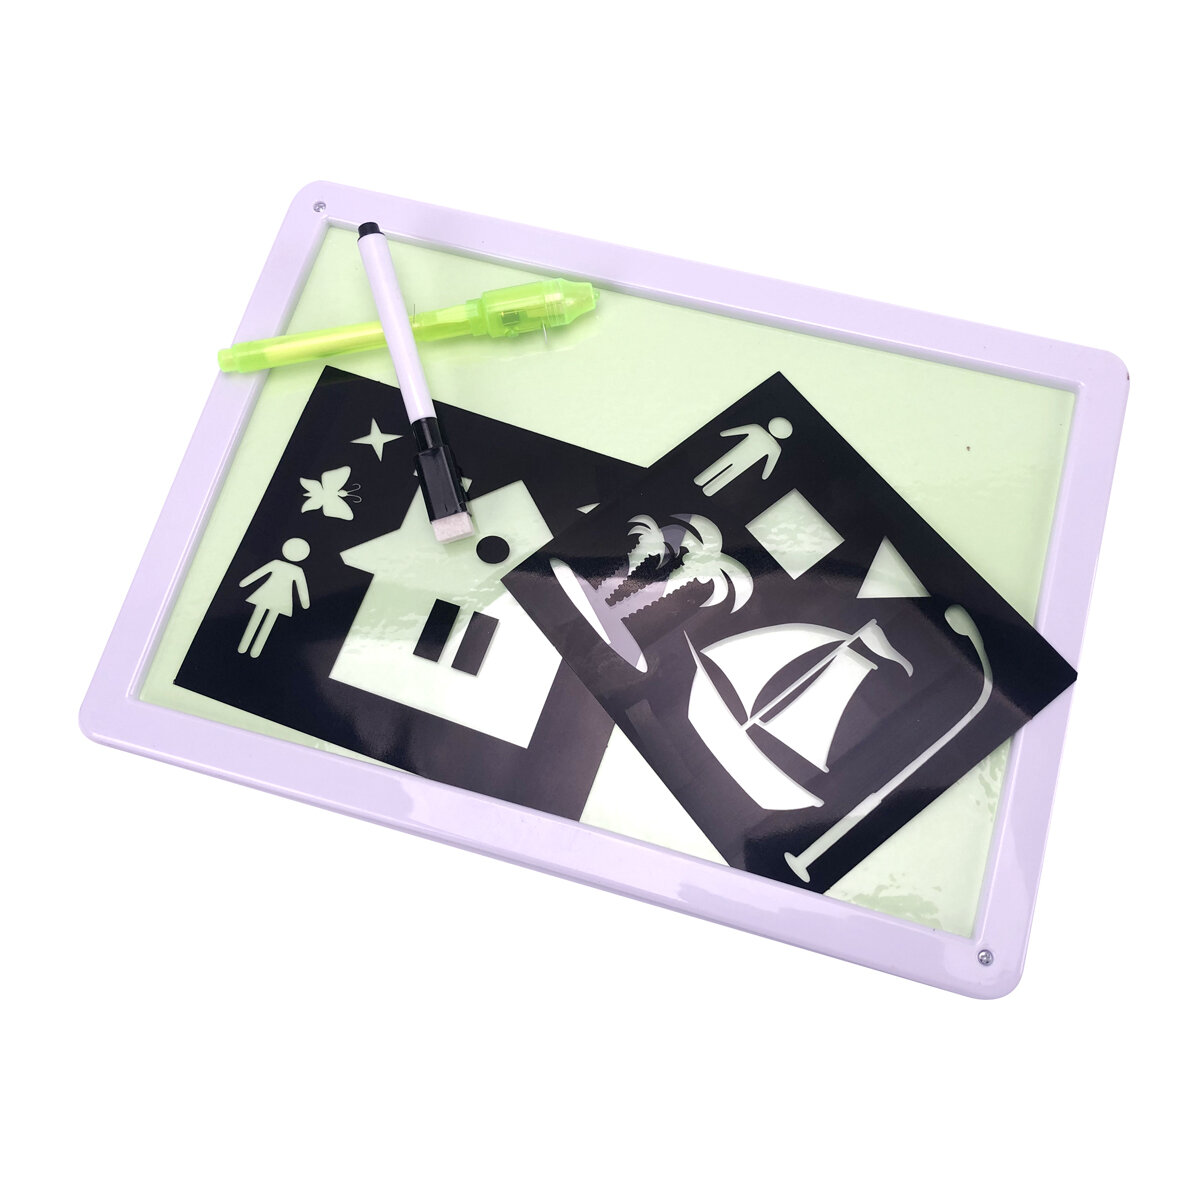 

Children's Illuminate Drawing Board A4 Glowing Painting Tablet Fun Brain Developing Fluorescent Drwaing Pad with Light